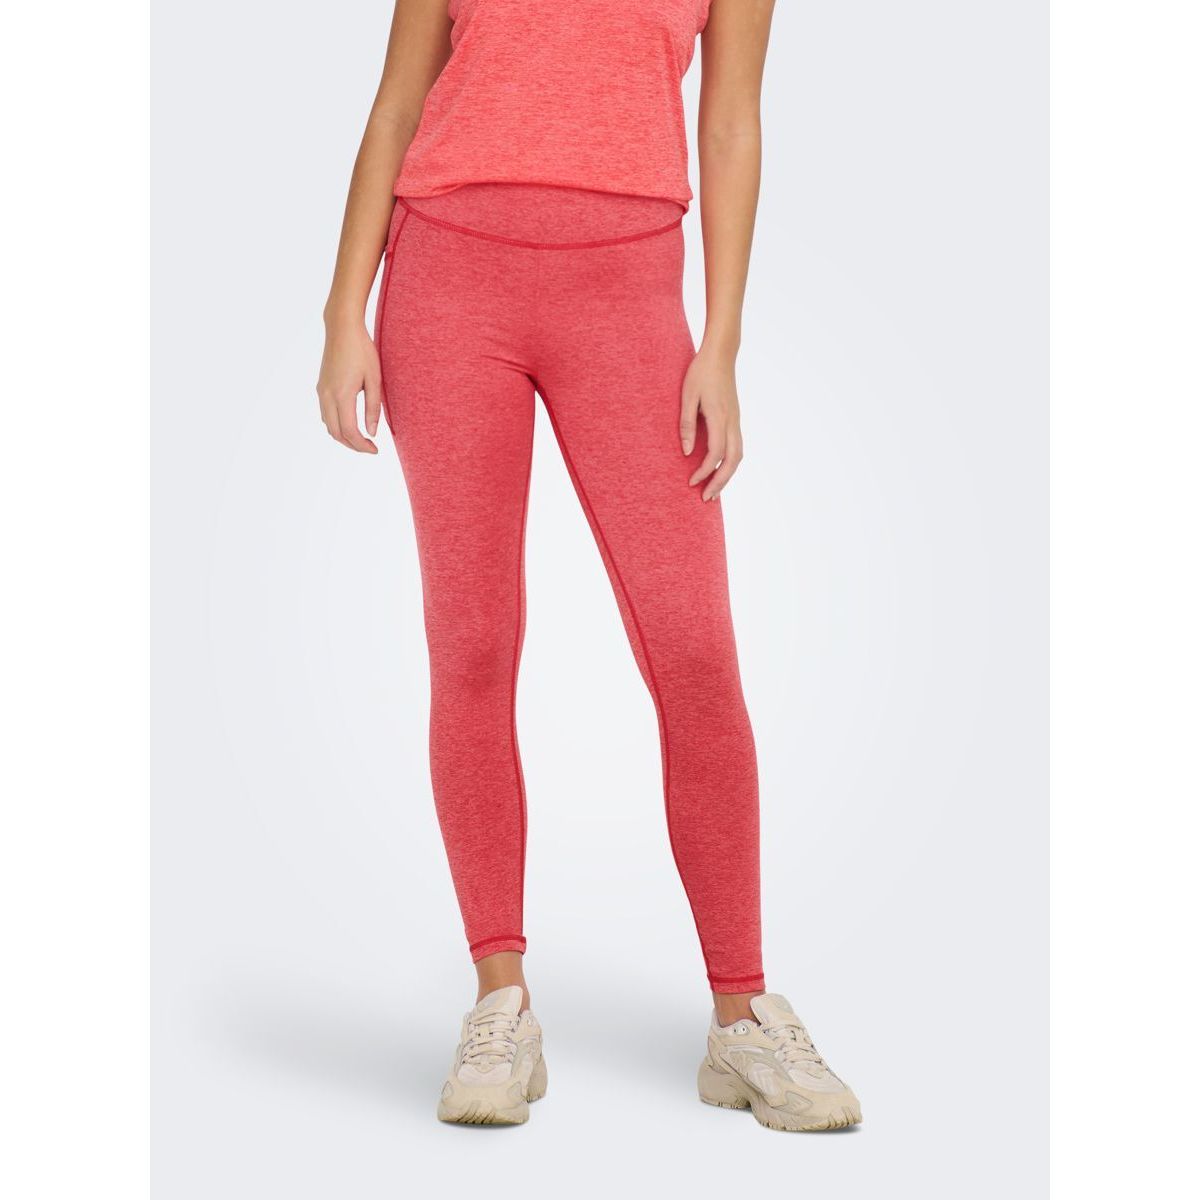 ONLY Play ONPIVY TRAIN - Leggings - sun kissed coral/coral